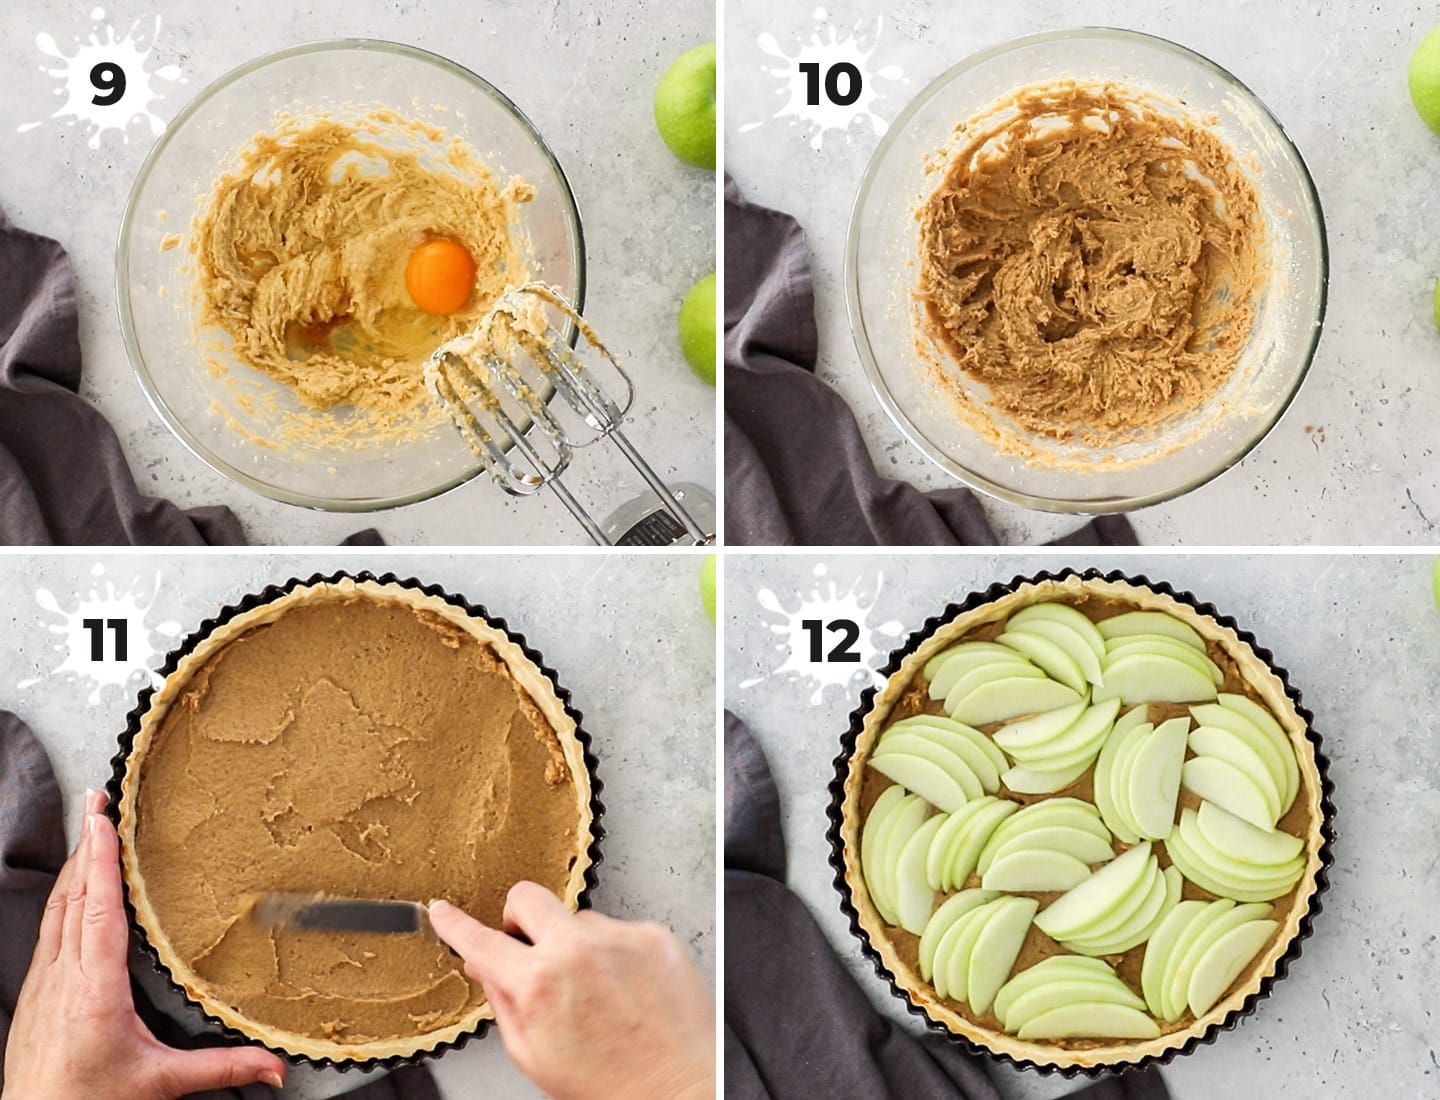 A collage showing how to make and assemble the filling.